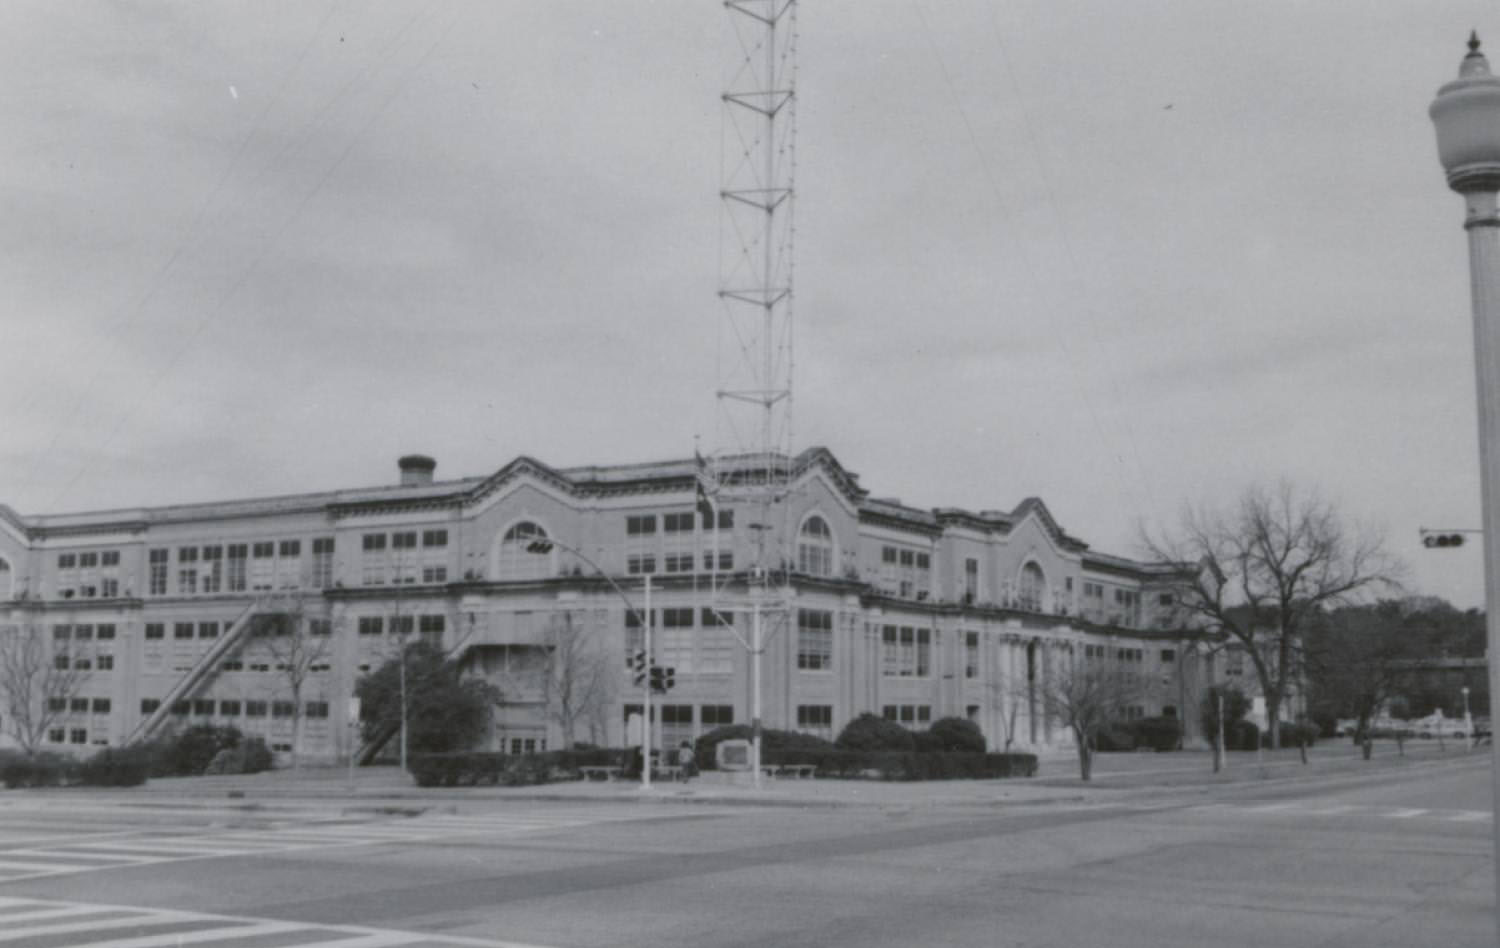 Austin High School Rio Grande Campus from the corner of 12th Street and Rio Grande Street looking north, 1960s